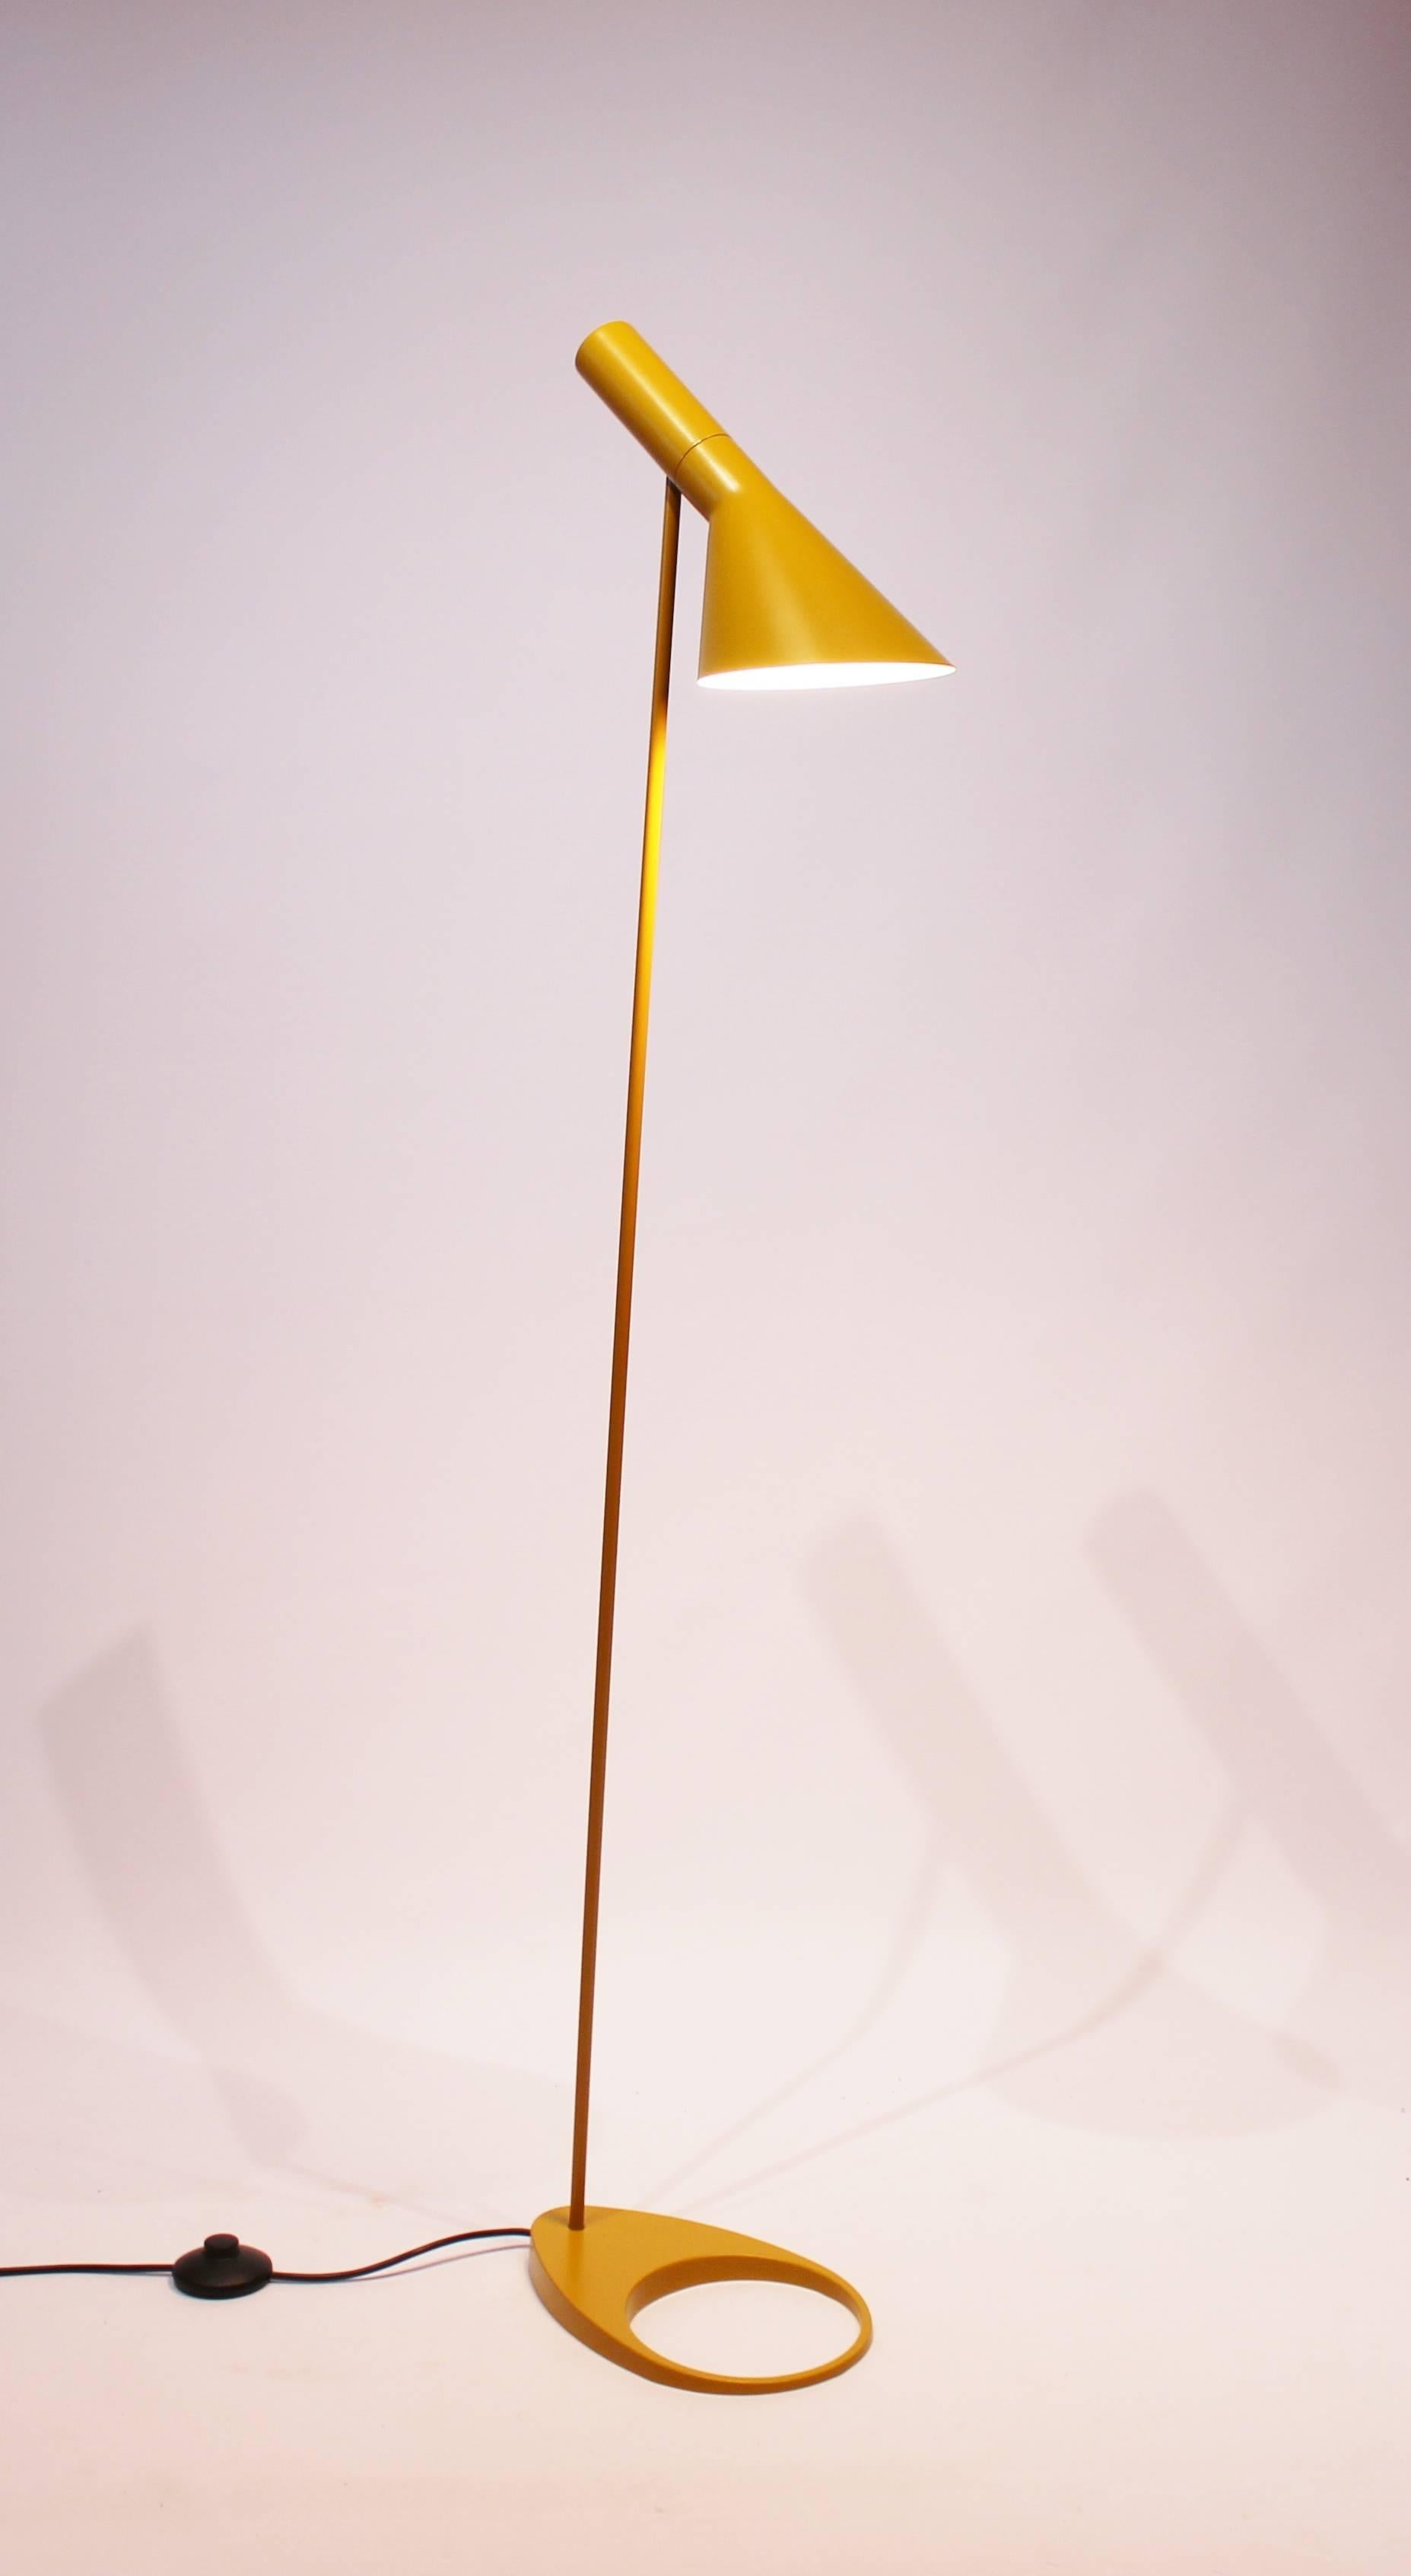 Yellow floor lamp designed by Arne Jacobsen in 1960 and manufactured by Louis Poulsen. The lamp is in great vintage condition and of Classic timeless Danish Design.